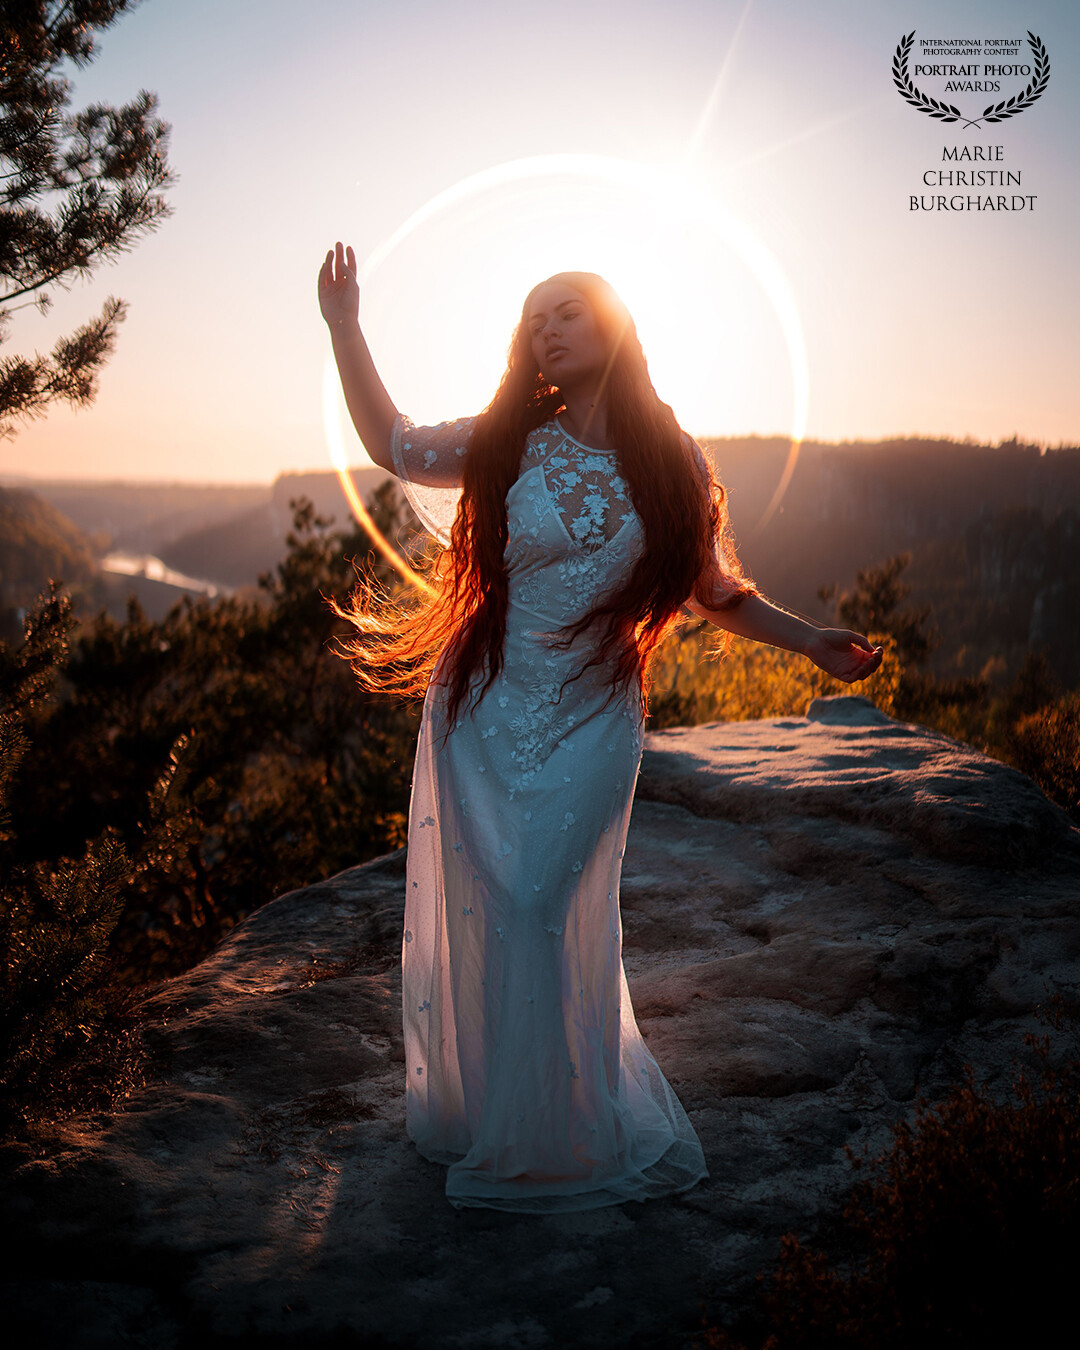 I took this photo a few months ago during a photo trip to Saxon Switzerland. We had a wonderful sunset at the Gamrig. When I was editing this photo I decided to add even more magic to it with the help of this halo behind Alina.<br />
<br />
Model: @alina_stolzenburg